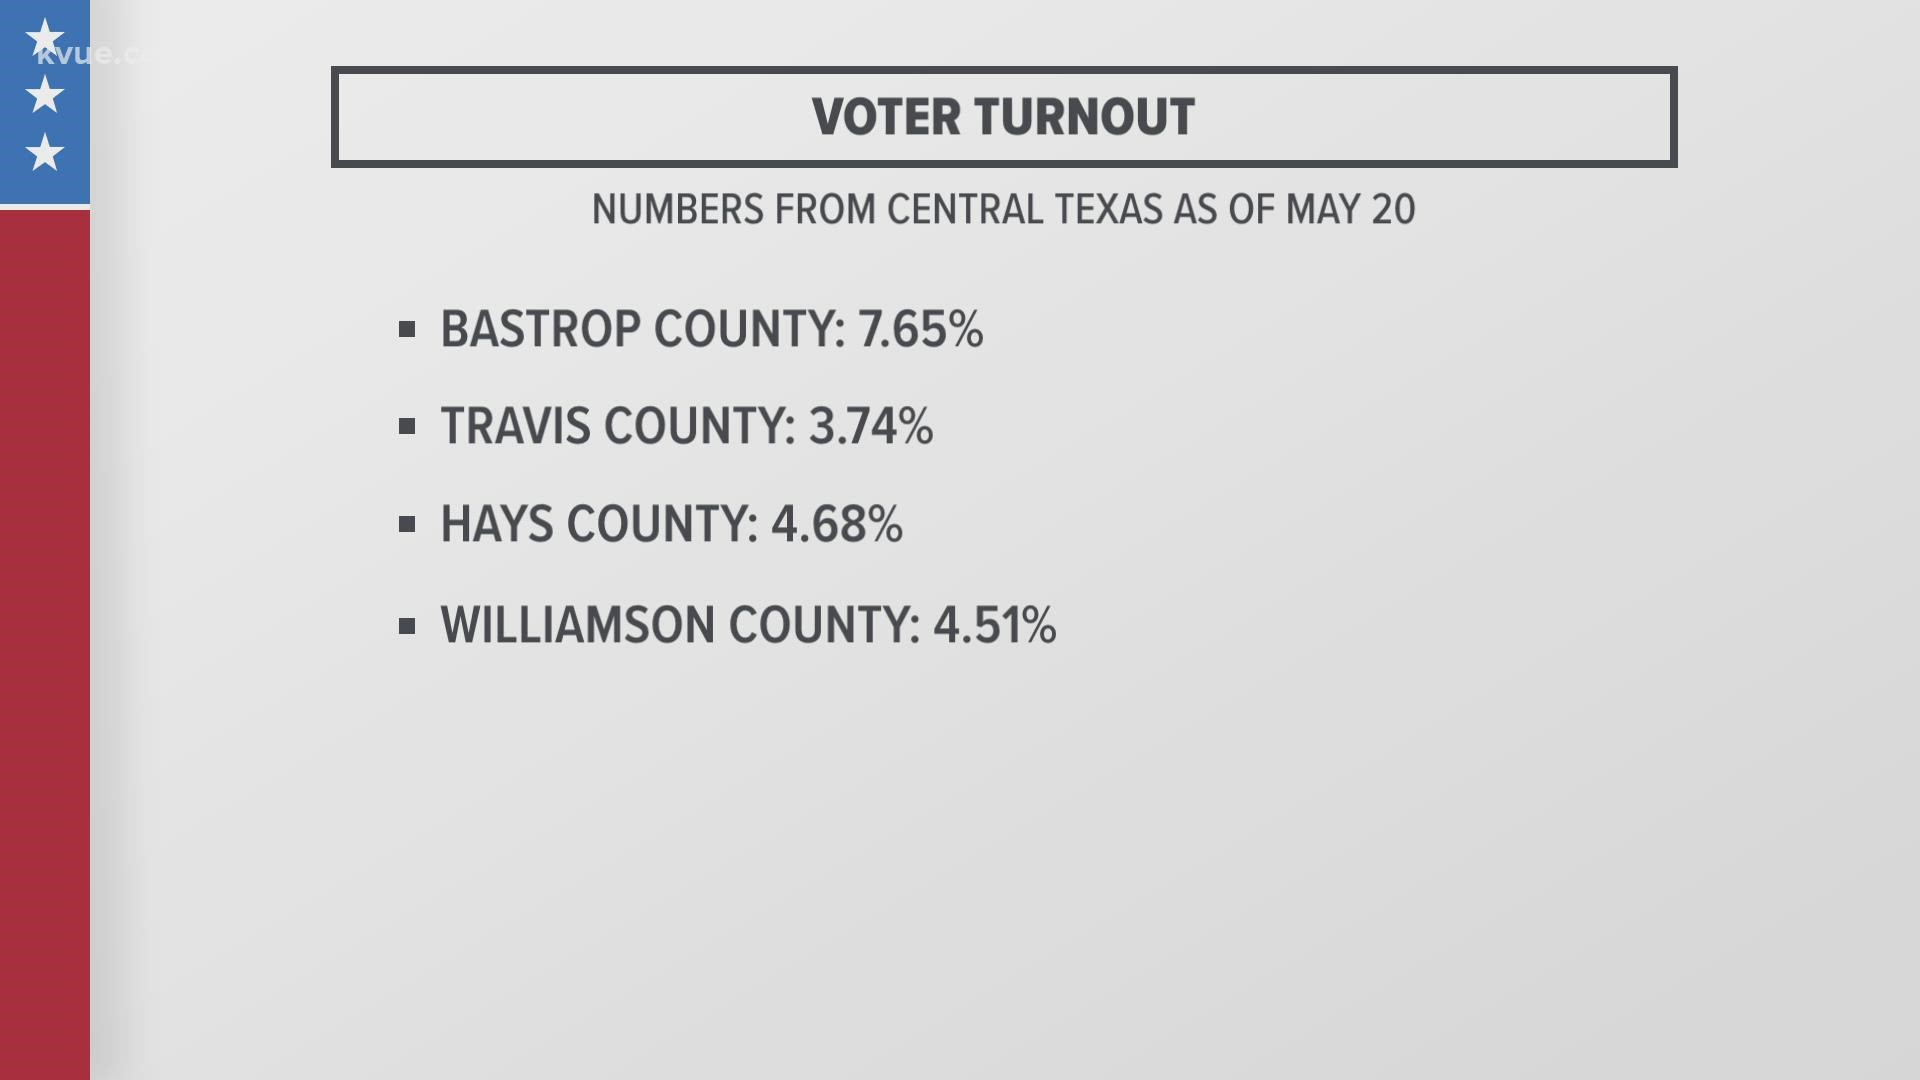 The polls will be open from 7 a.m. until 7 p.m. Tuesday. So far, voter turnout is lackluster for the primary runoff election.